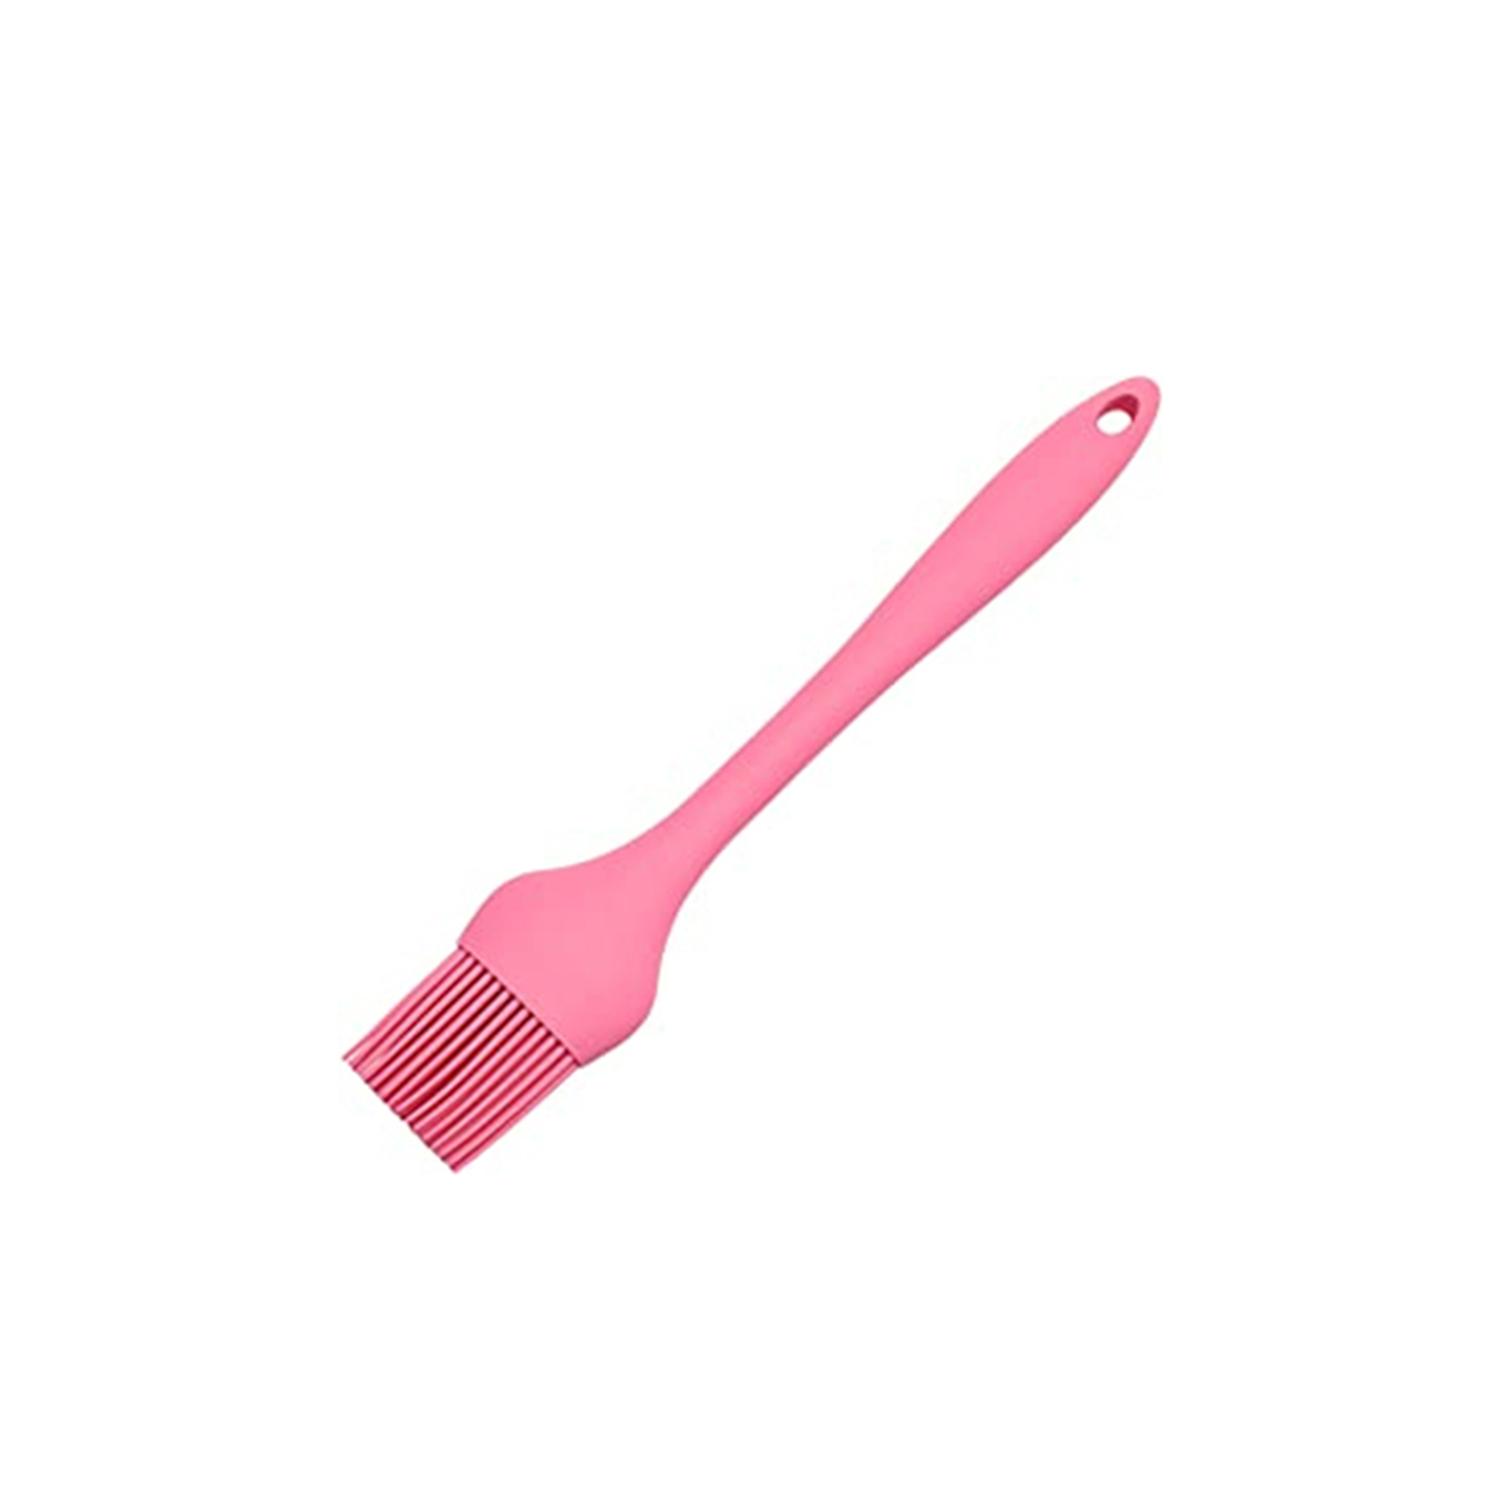 8'' COLOURFUL SILICON BRUSH PINK